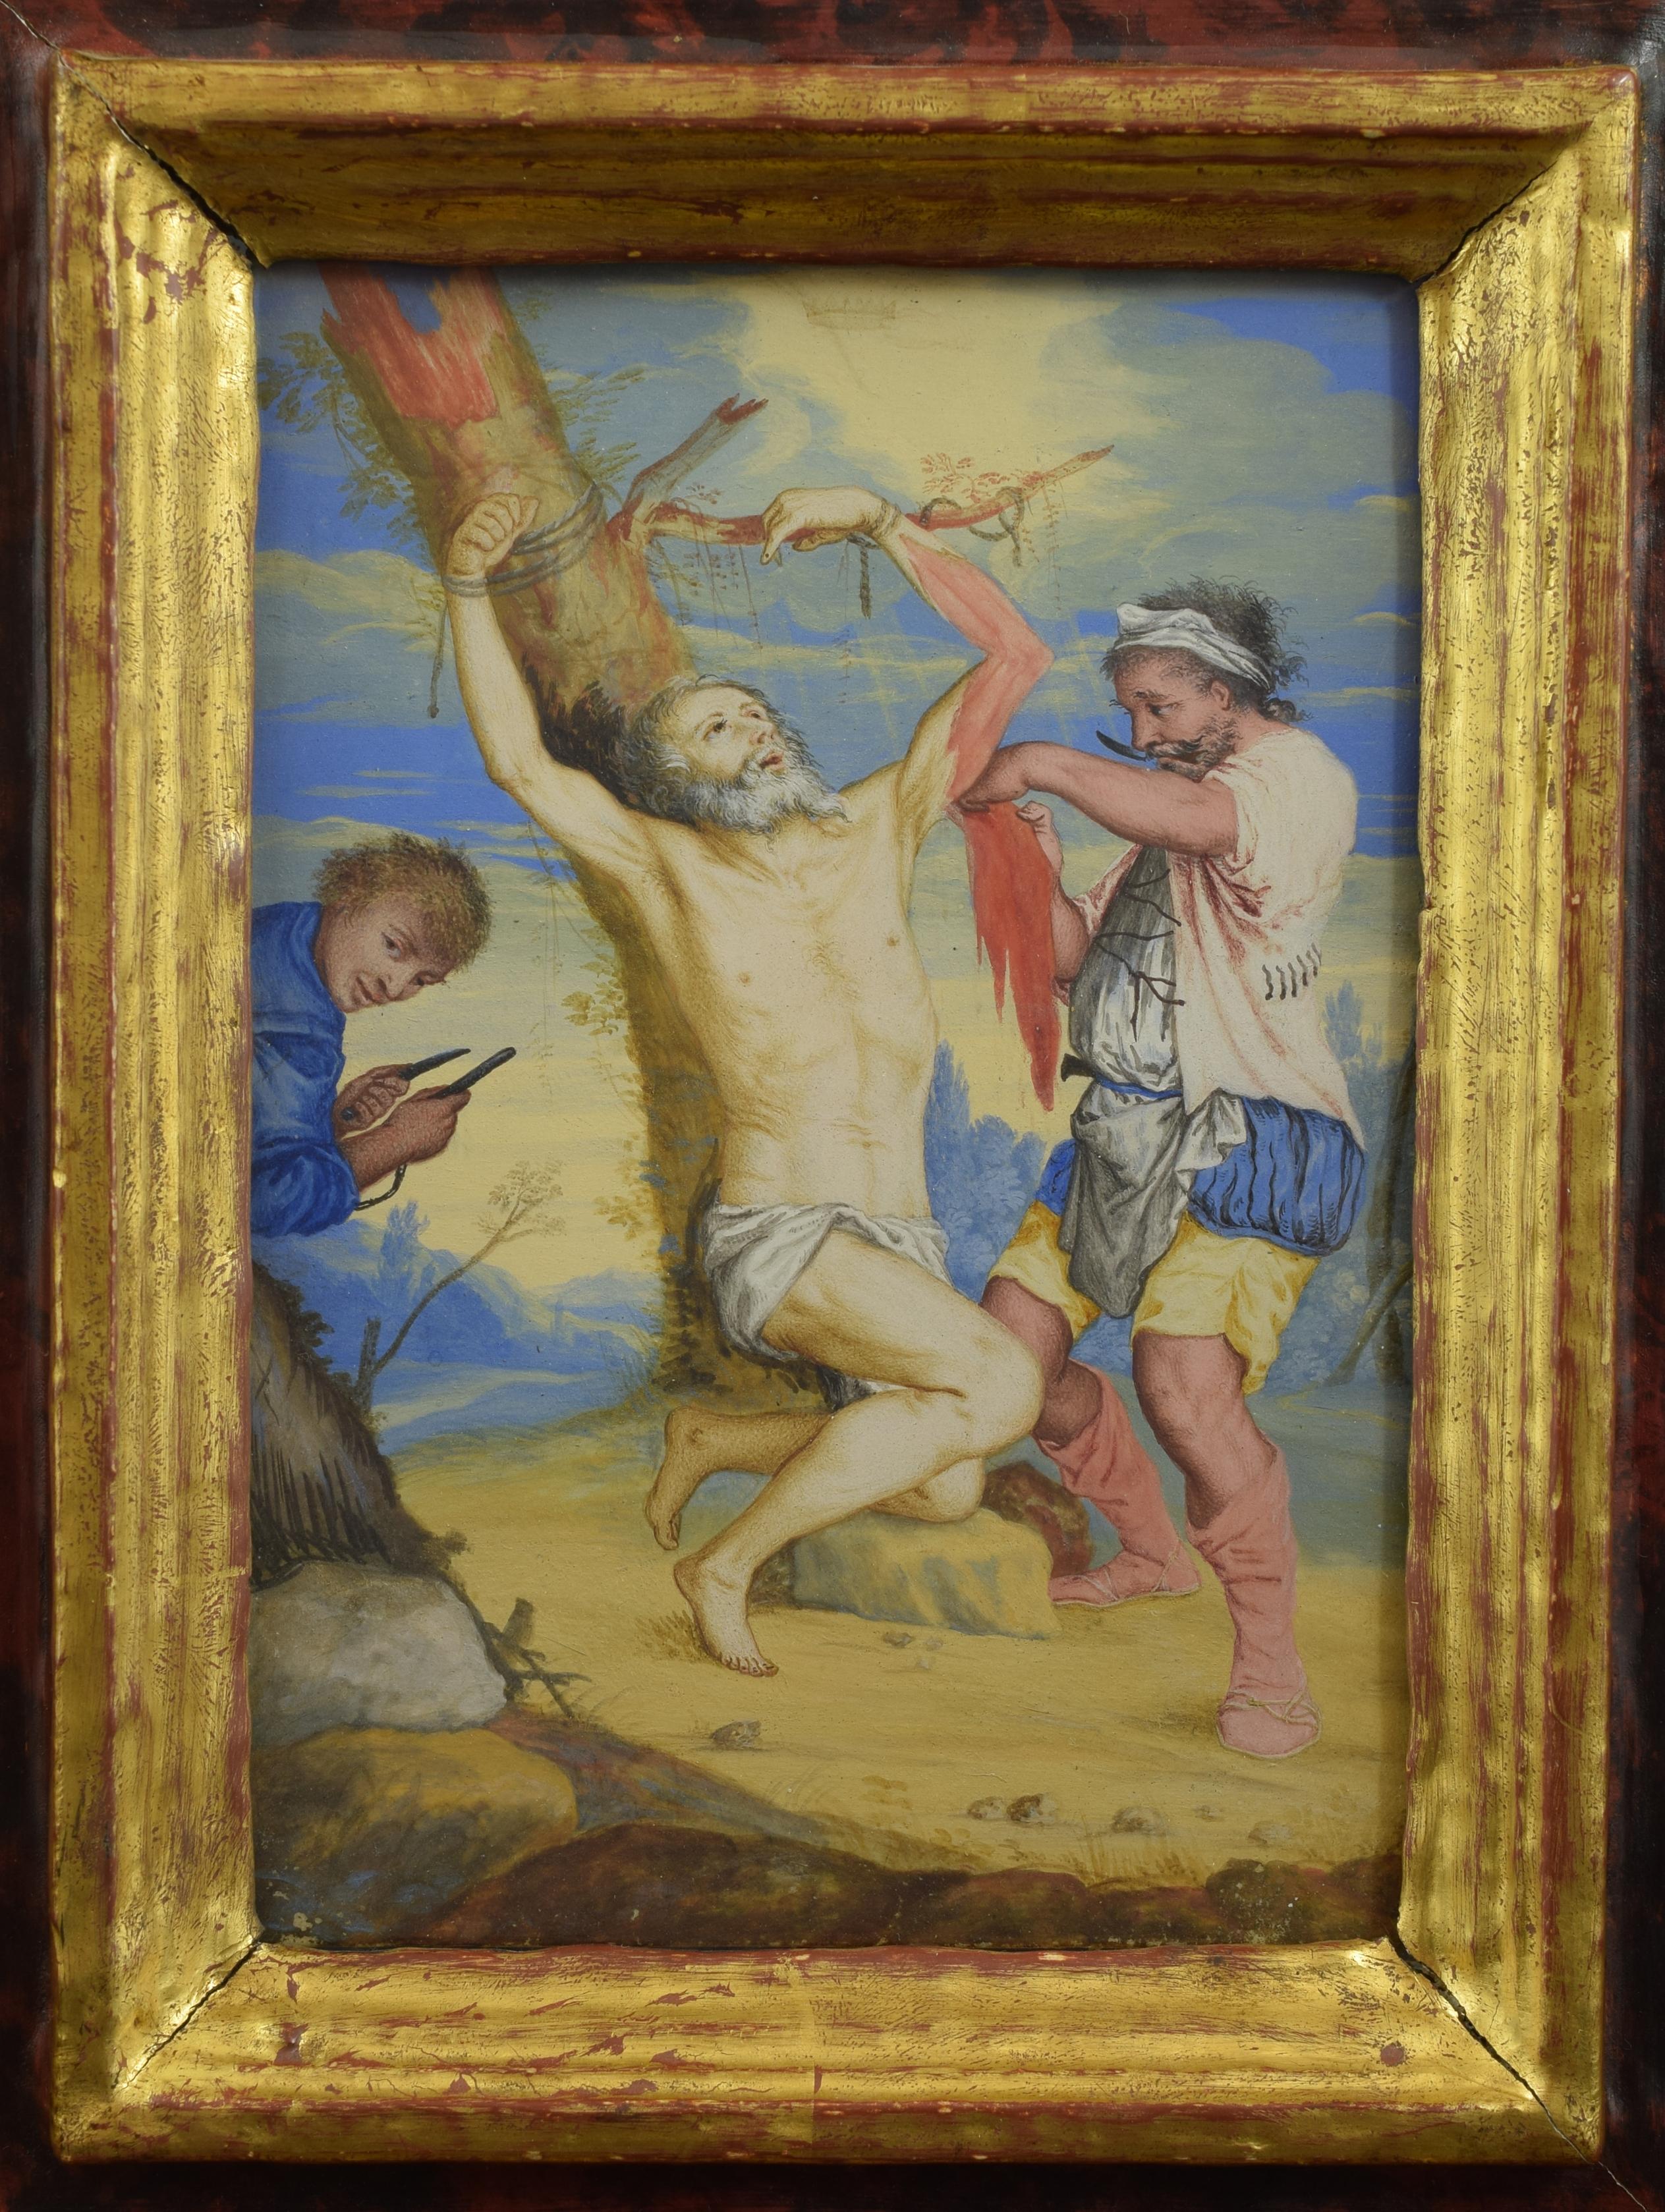 St. Bartholomew's Martyrdom. Painting on vellum. After models from Ribera y Cucó, José (Játiva, Spain, 1591-Naples, Italy, 1652). 
The composition is organized around the diagonal that draws the trunk of the tree to which the old man is tied. The